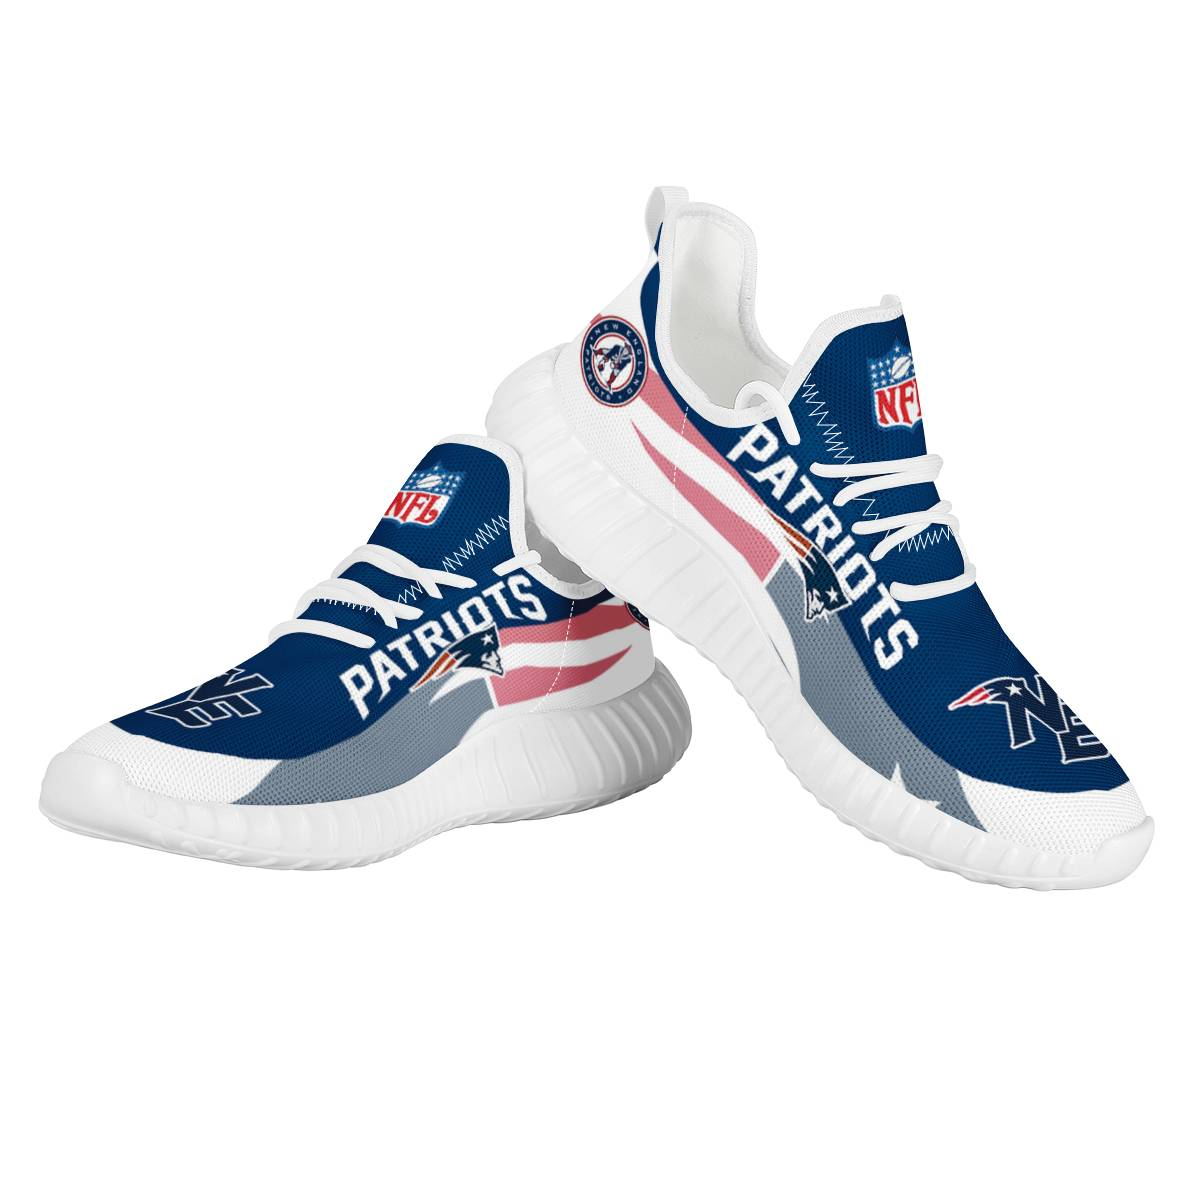 Women's New England Patriots Mesh Knit Sneakers/Shoes 011